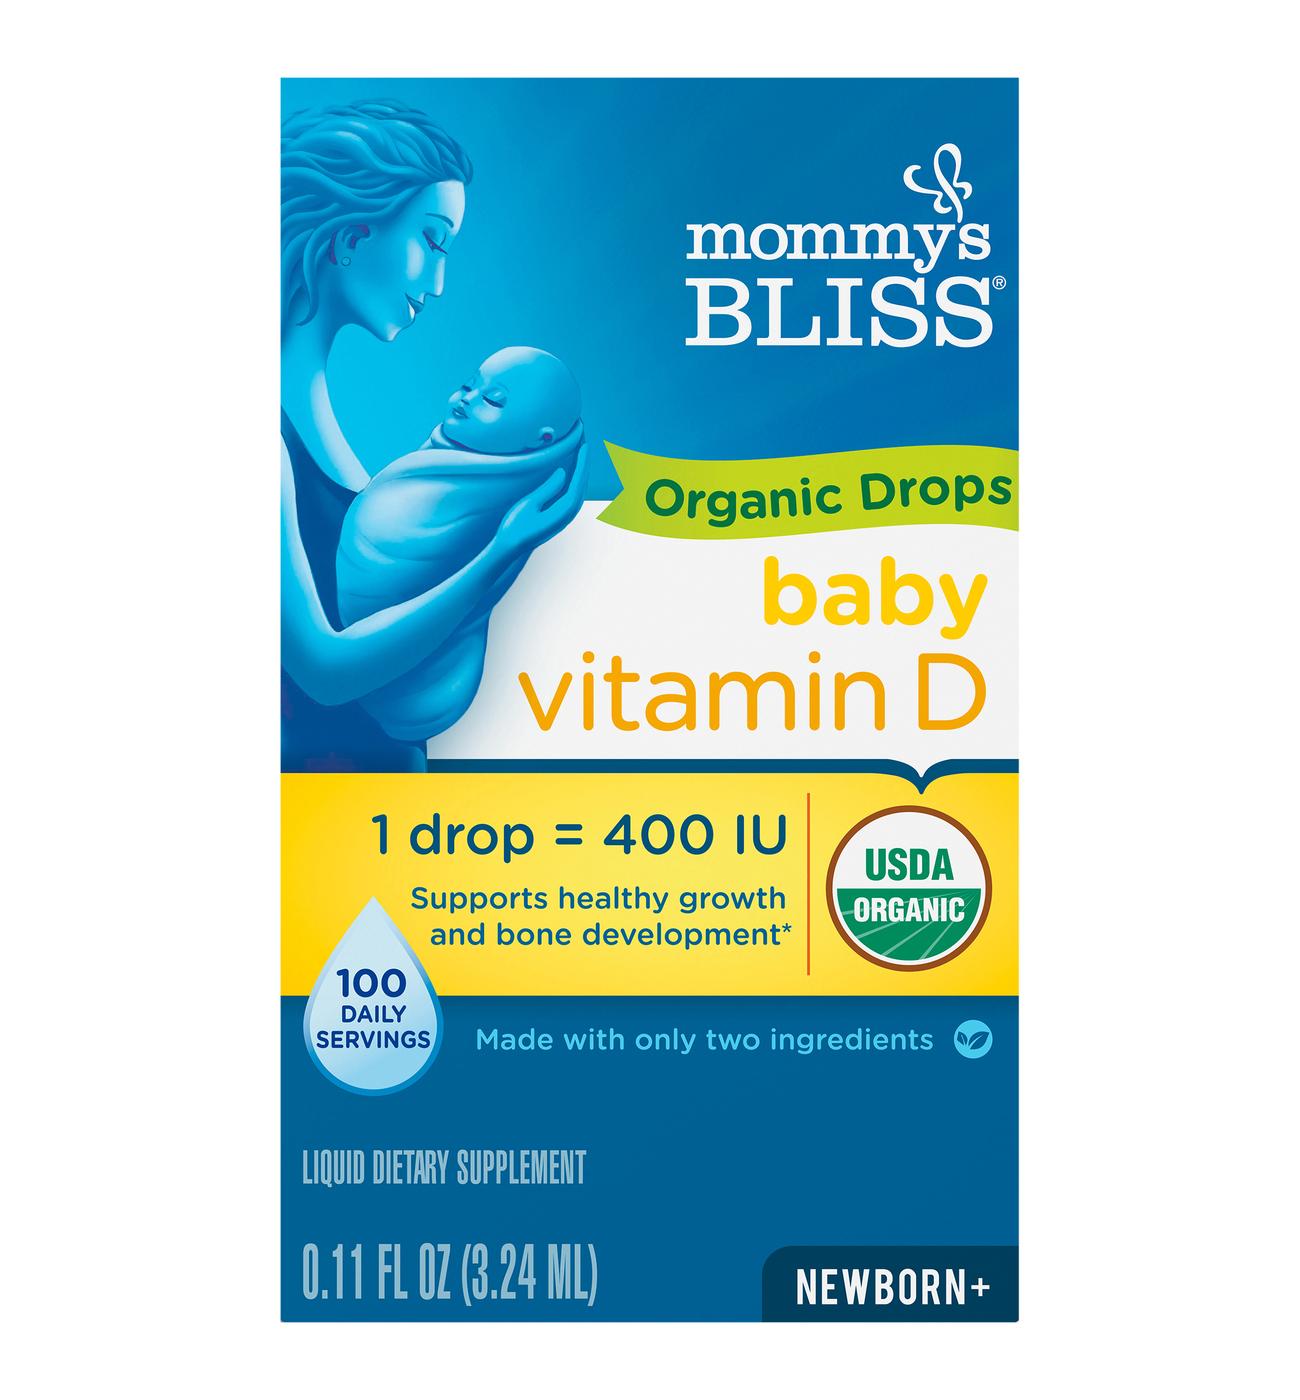 Mommy's Bliss Baby Vitamin D Organic Drops; image 1 of 2